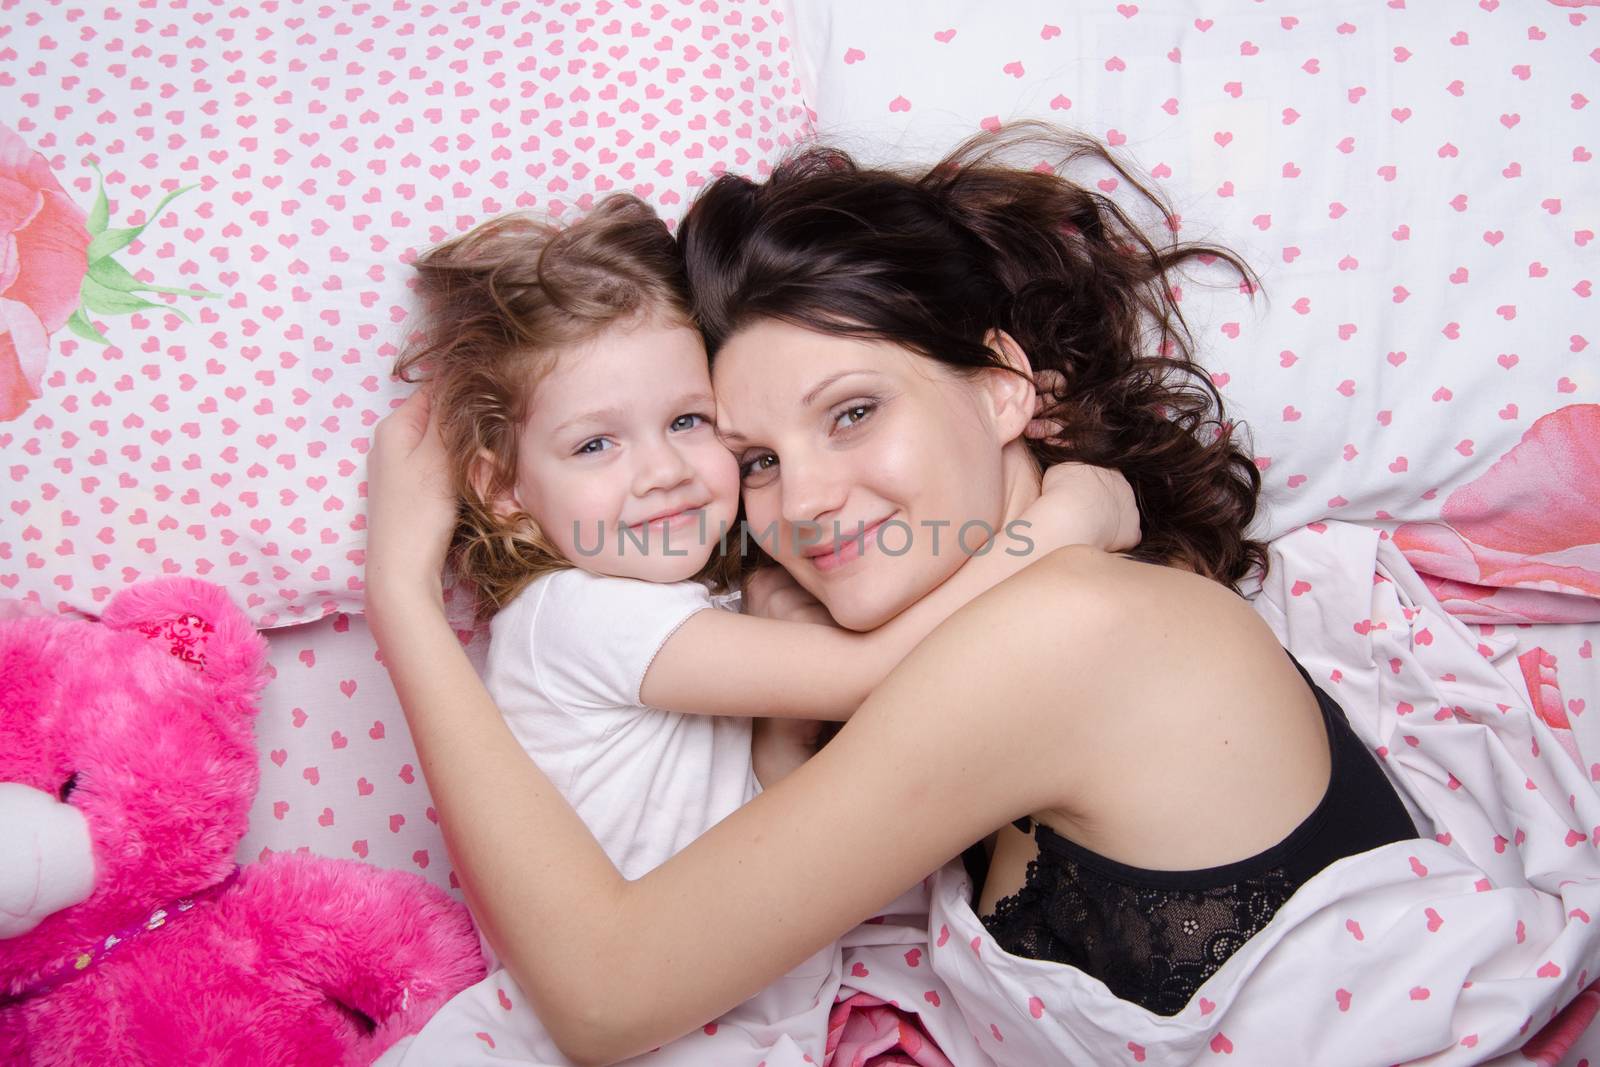 Mom and daughter with an excellent mood lie in bed